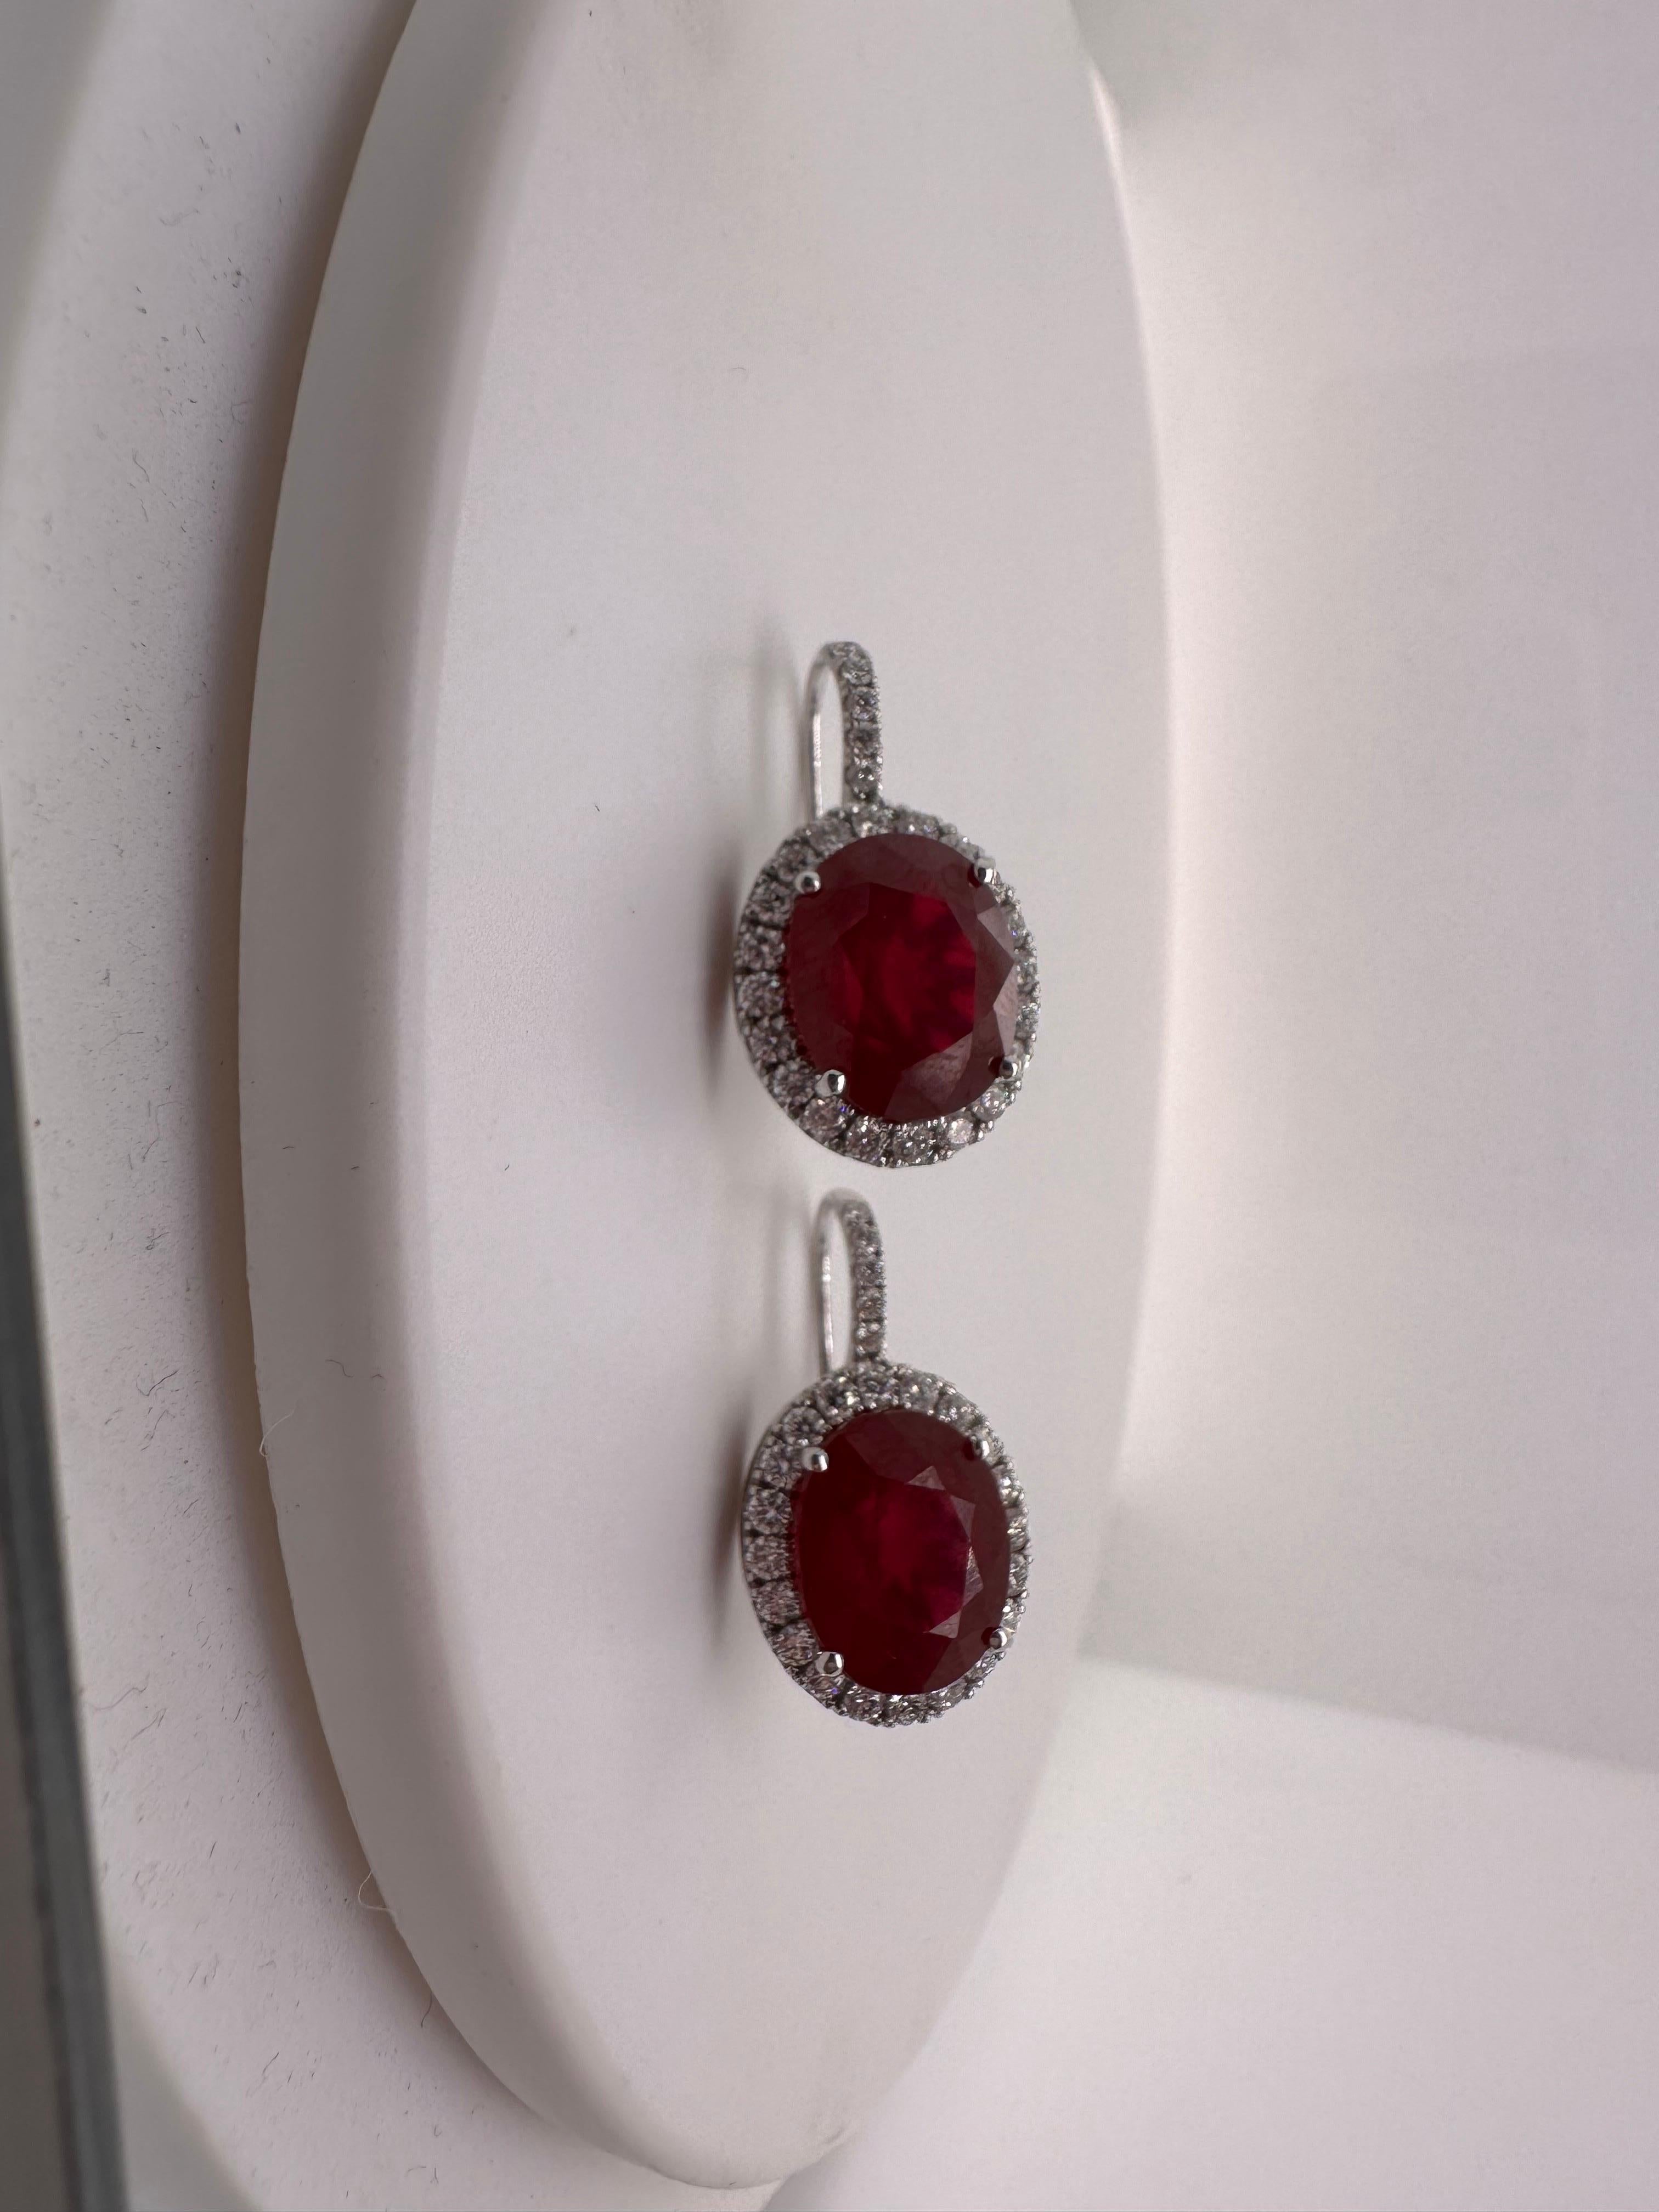 Large diamond earrings with stunning red rubies in the center made in 14KT white gold. The rubies are enhanced hence the price is not that high!

Metal Type: 14KT
Rubies:20ct approximately (natural but enhanced)
Natural Diamond(s): 
Color: